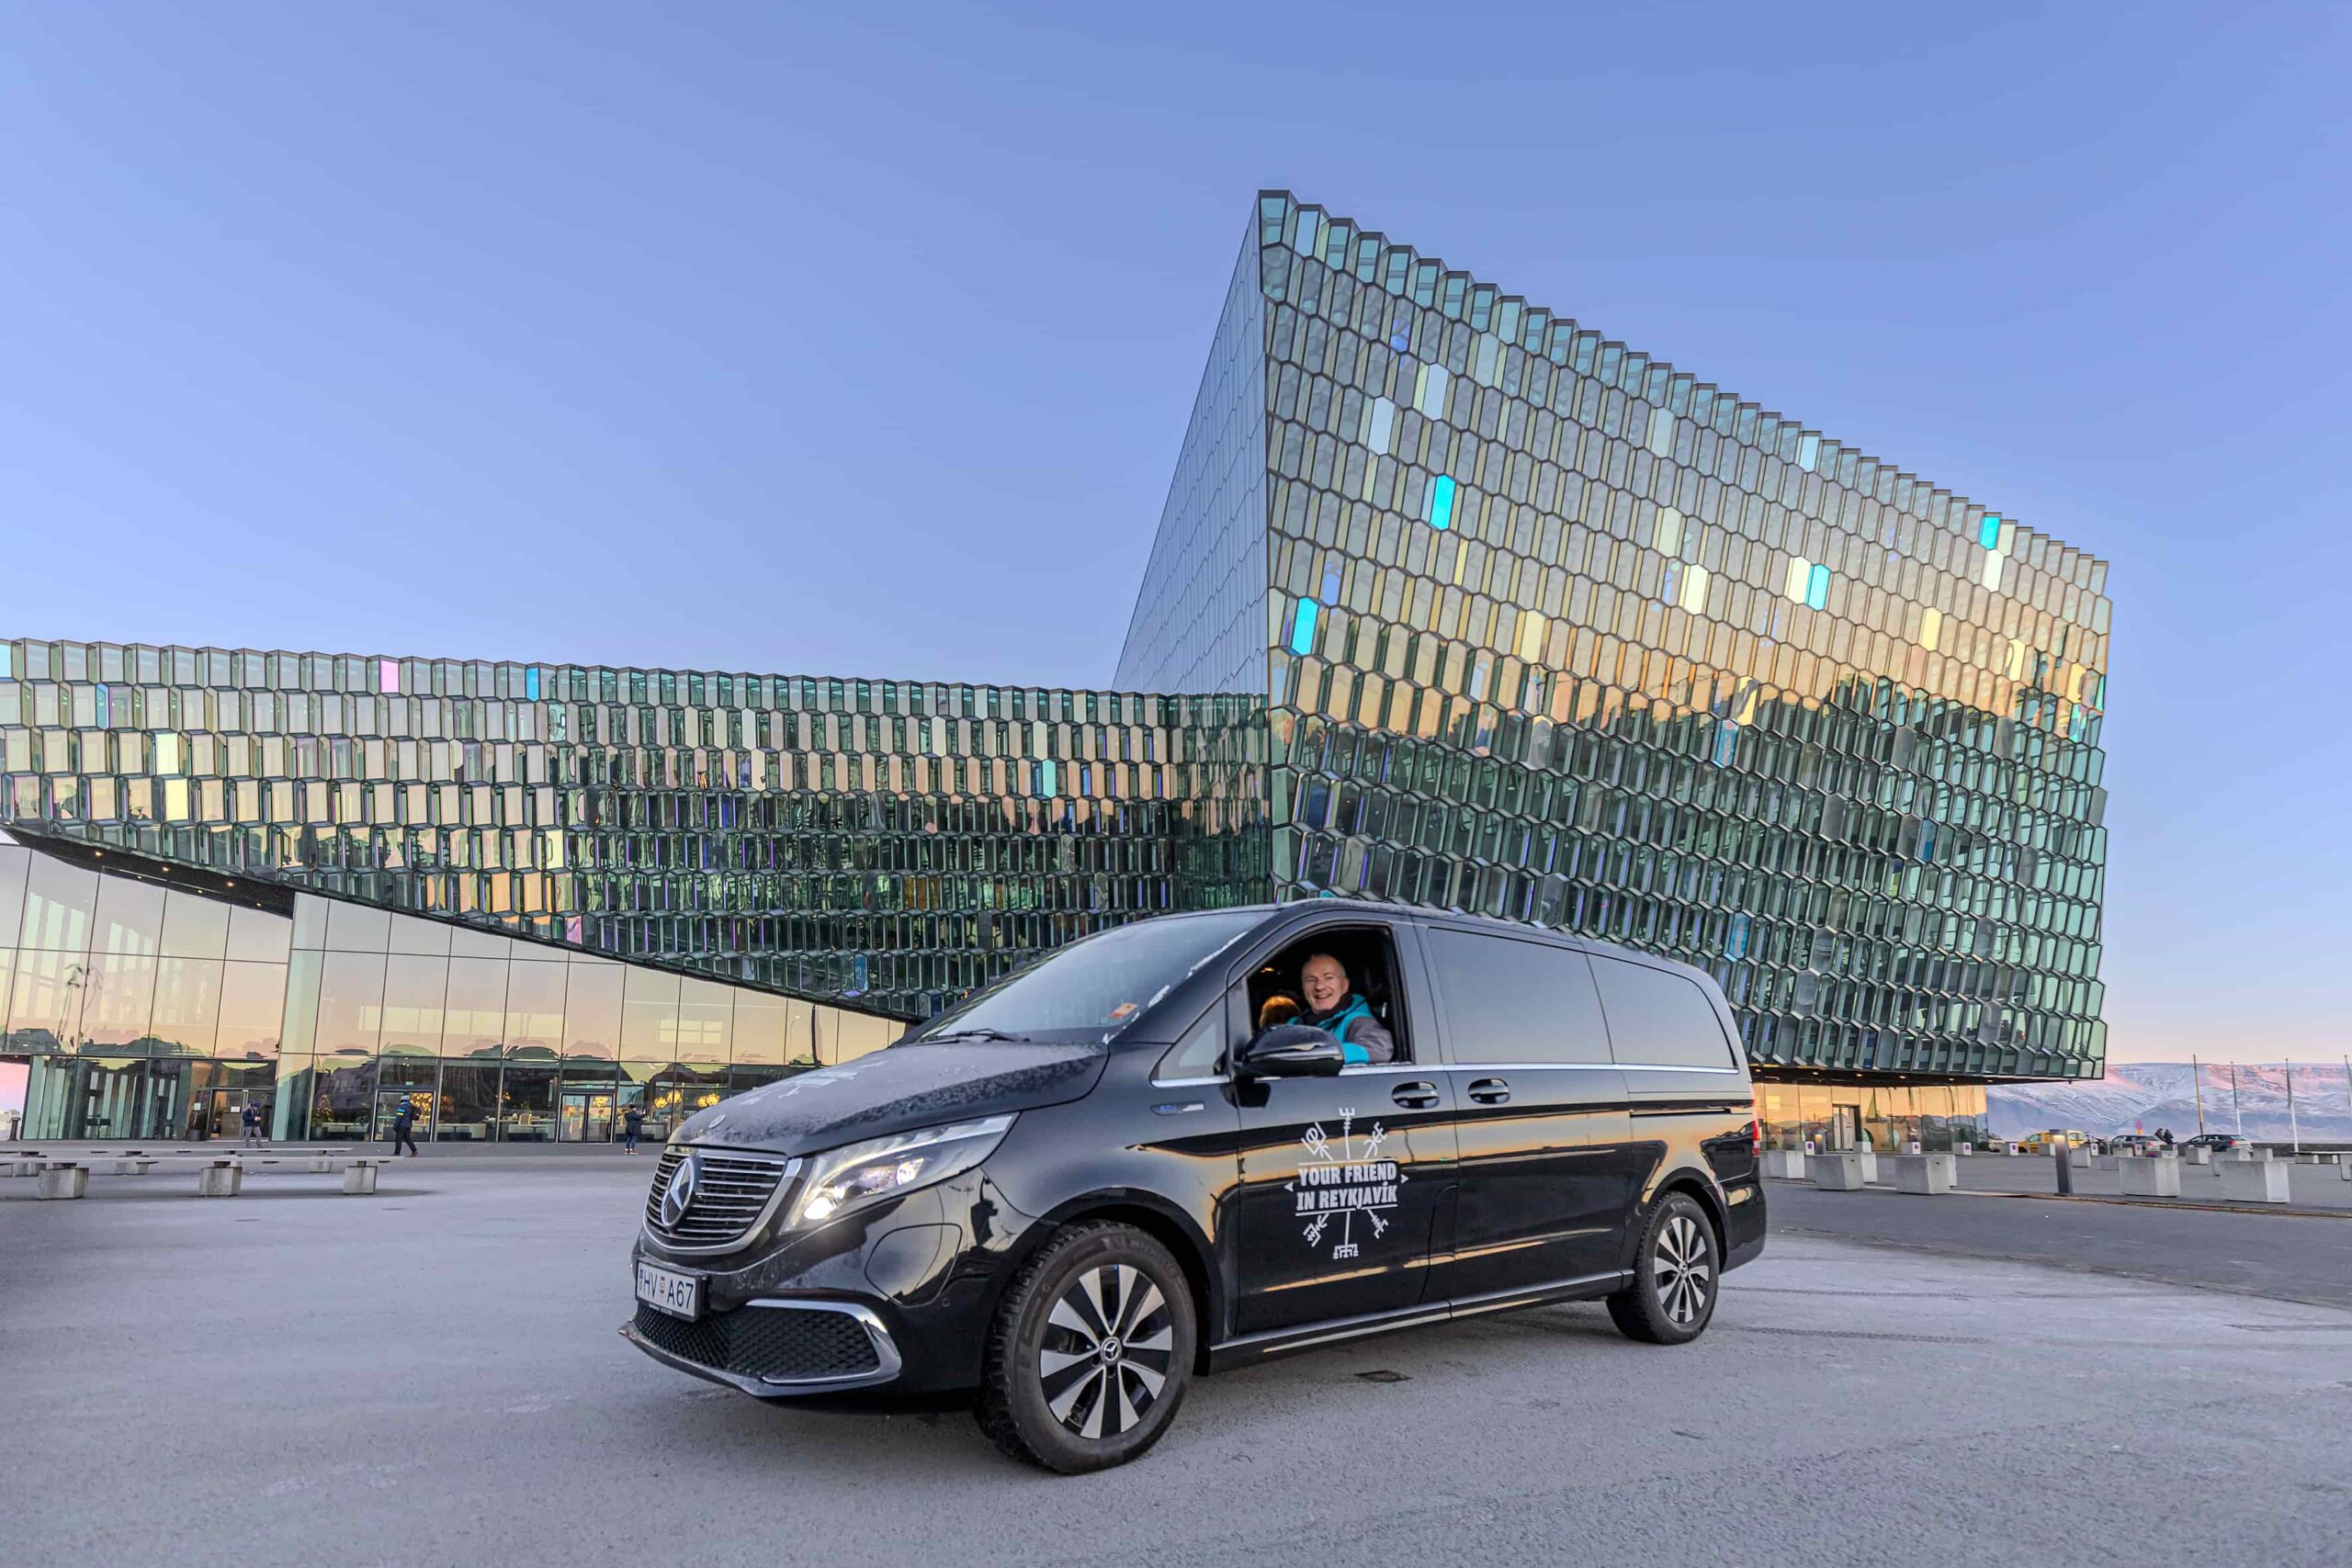 A tour vehicle from Your Friend in Reykjavik in front of the Harpa Concert Hall